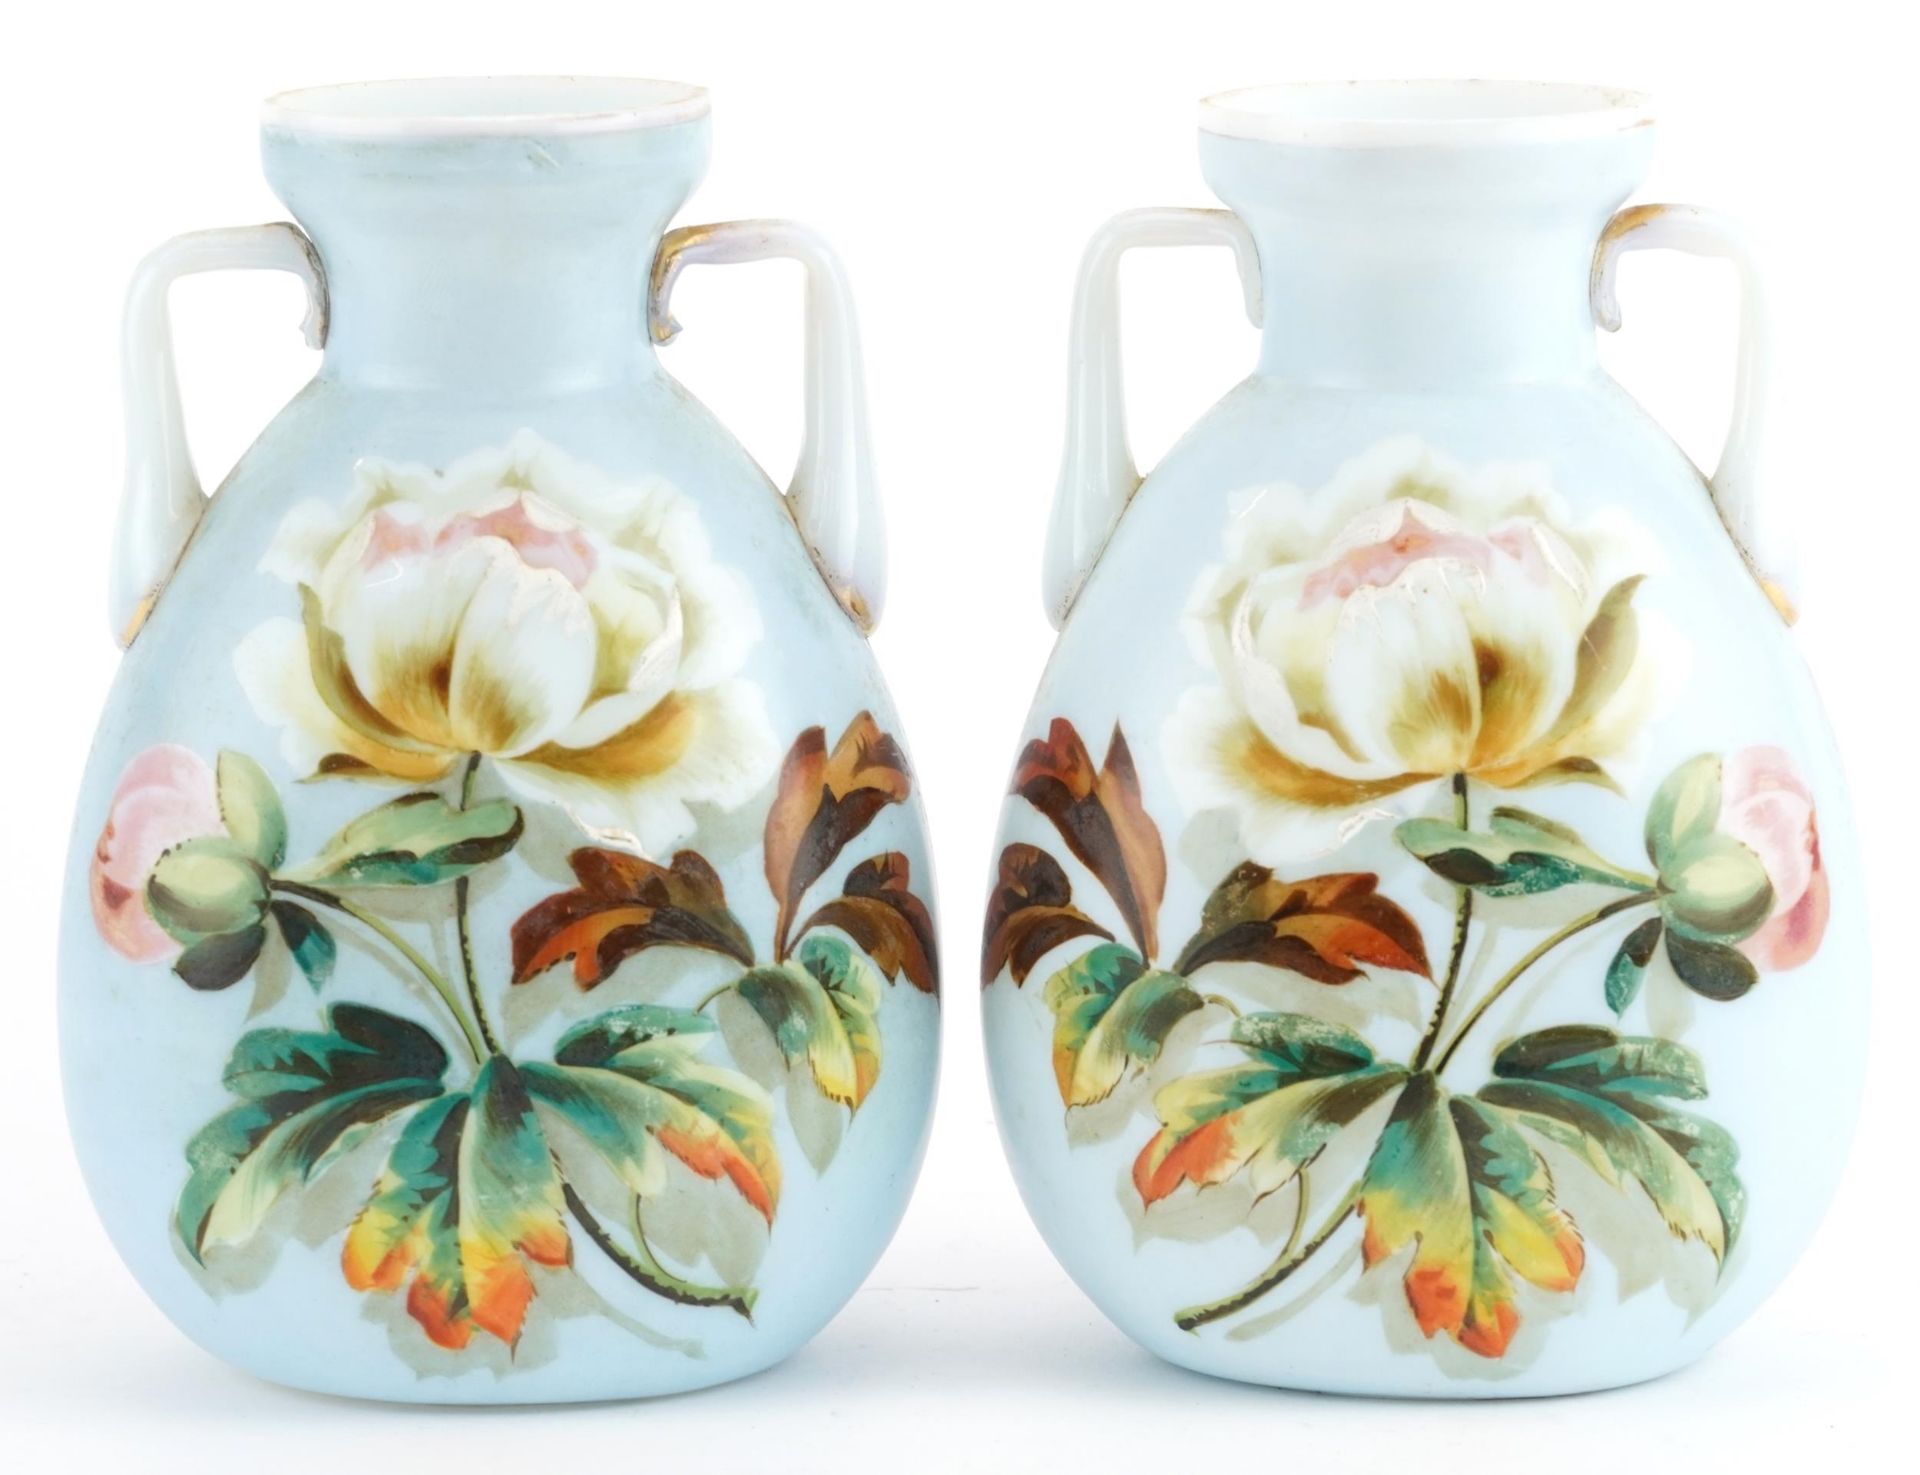 Pair of 19th century opaline glass vases with twin handles, each hand painted with flowers, 17cm